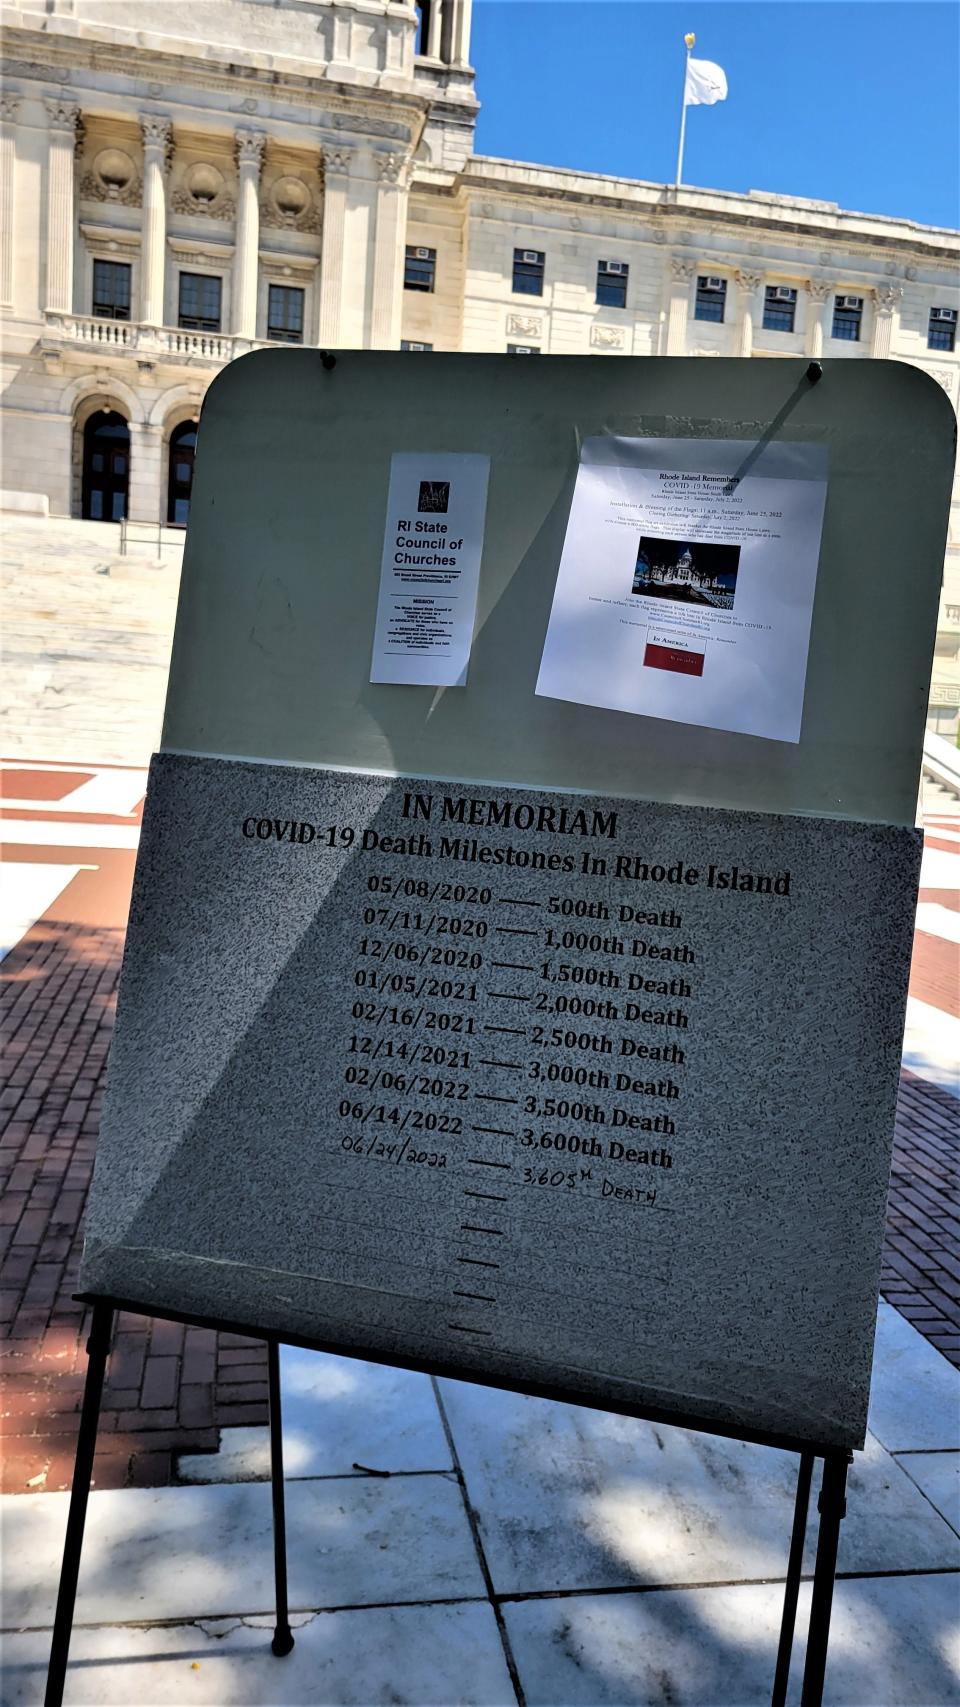 Rhode Island's COVID-19 death milestones are listed on a display on the State House steps.